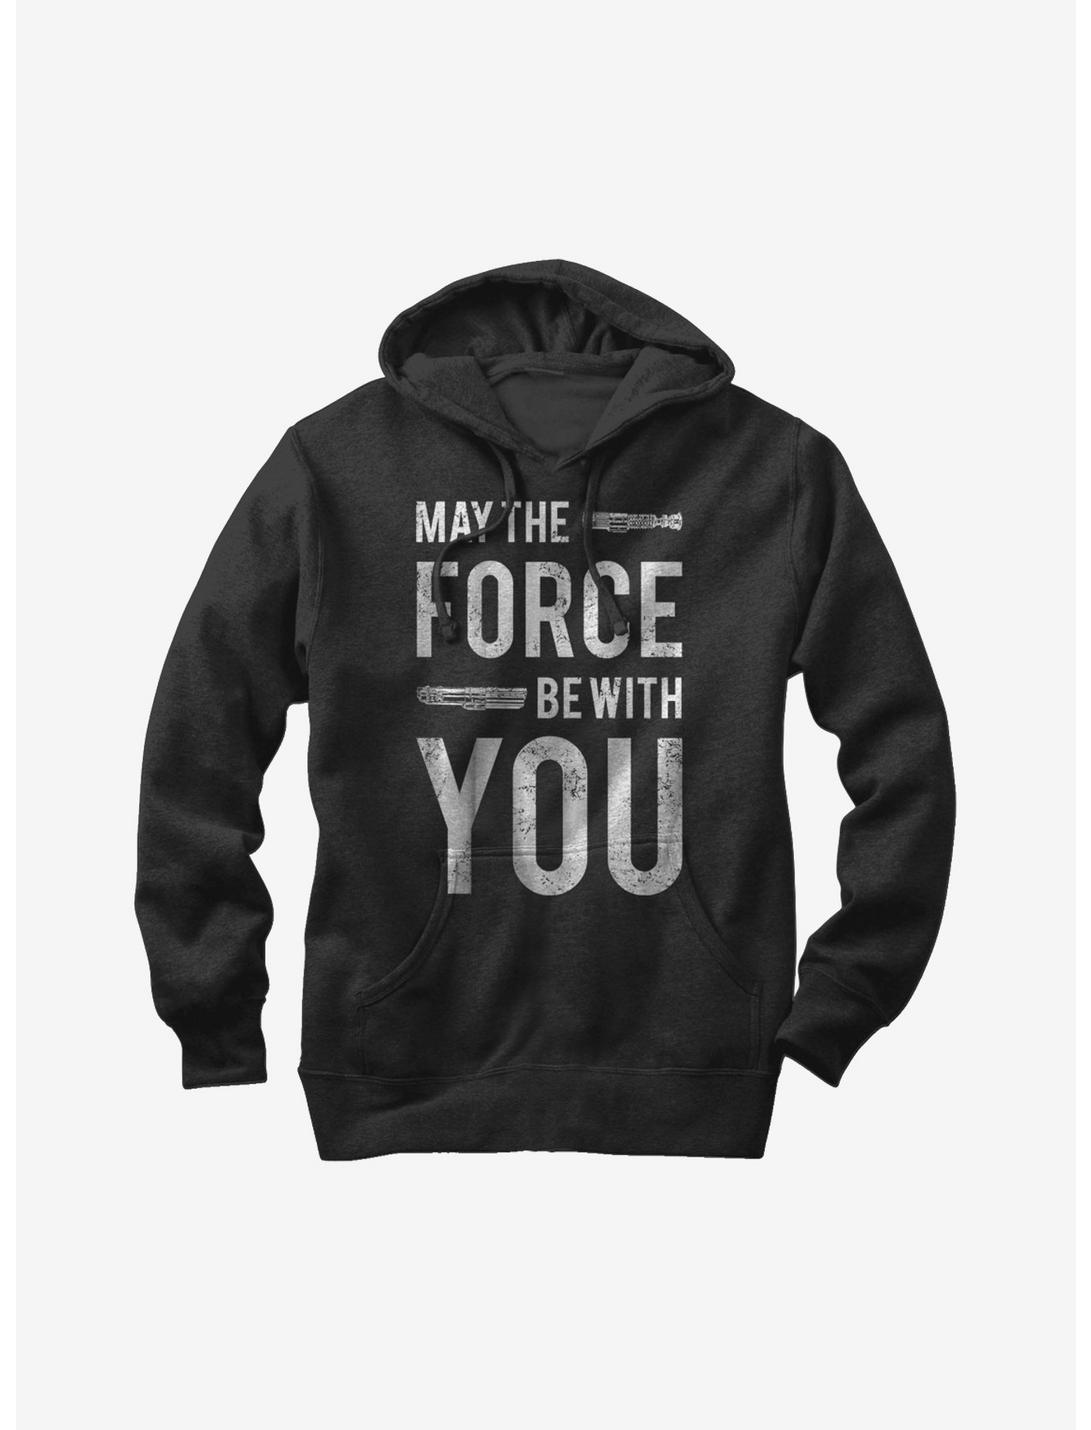 Star Wars May the Force Be With You Lightsaber Hoodie, BLACK, hi-res